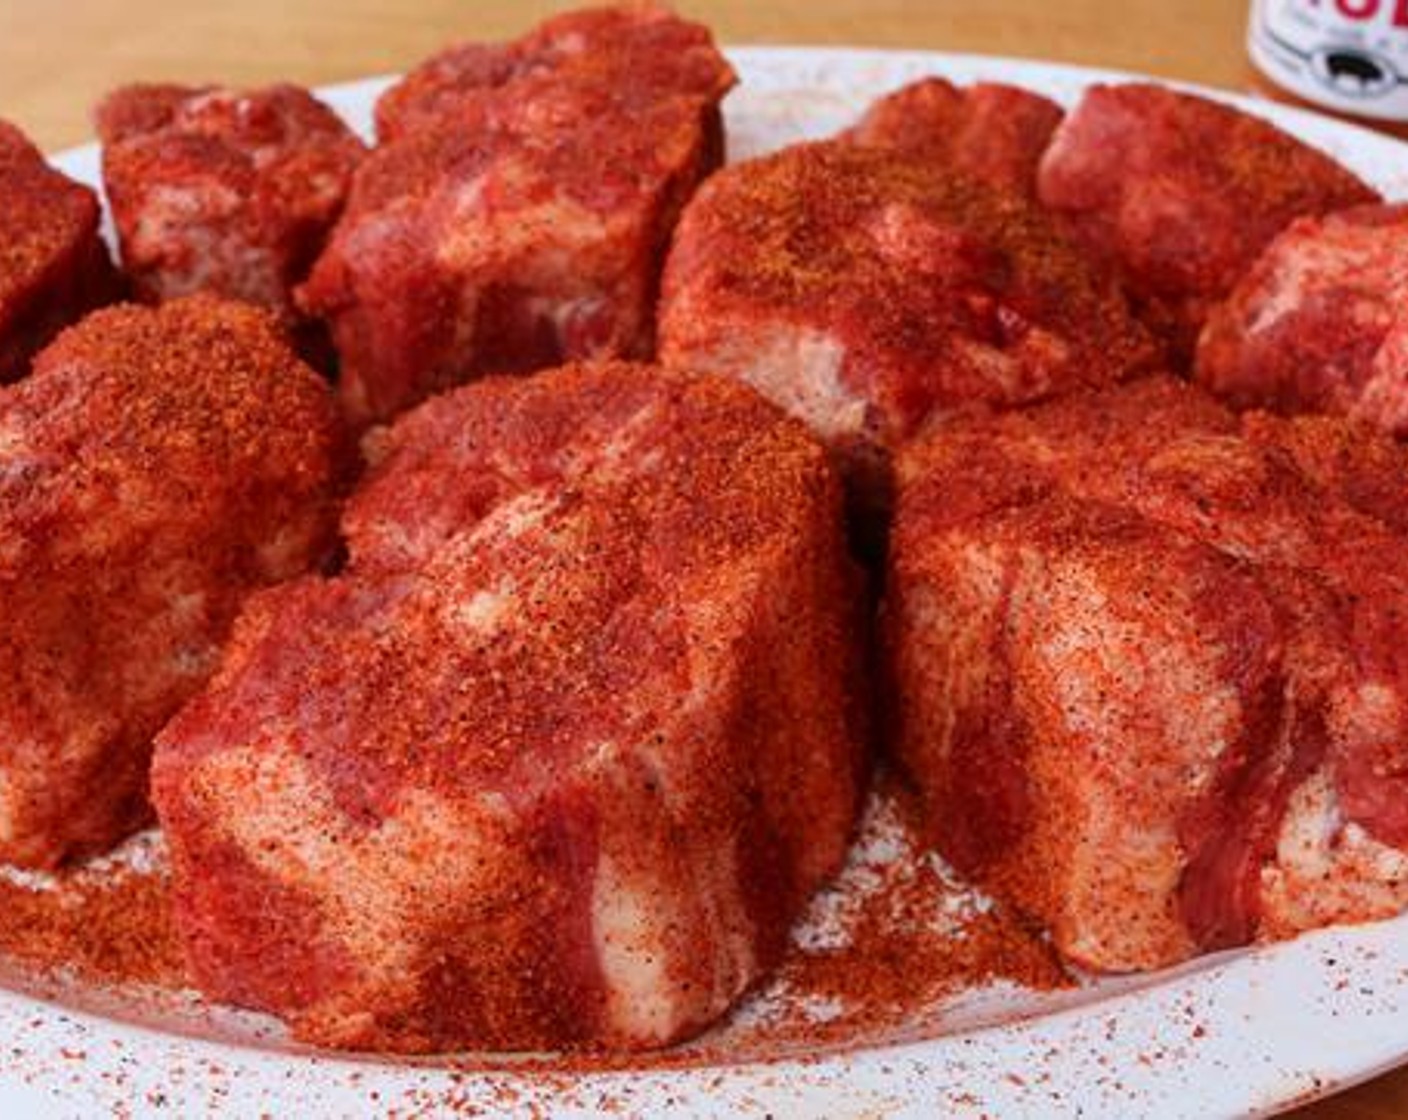 step 6 Trim excess fat from outer edges of Oxtails (4 lb) and season all sides with Barbecue Rub (1/4 cup).